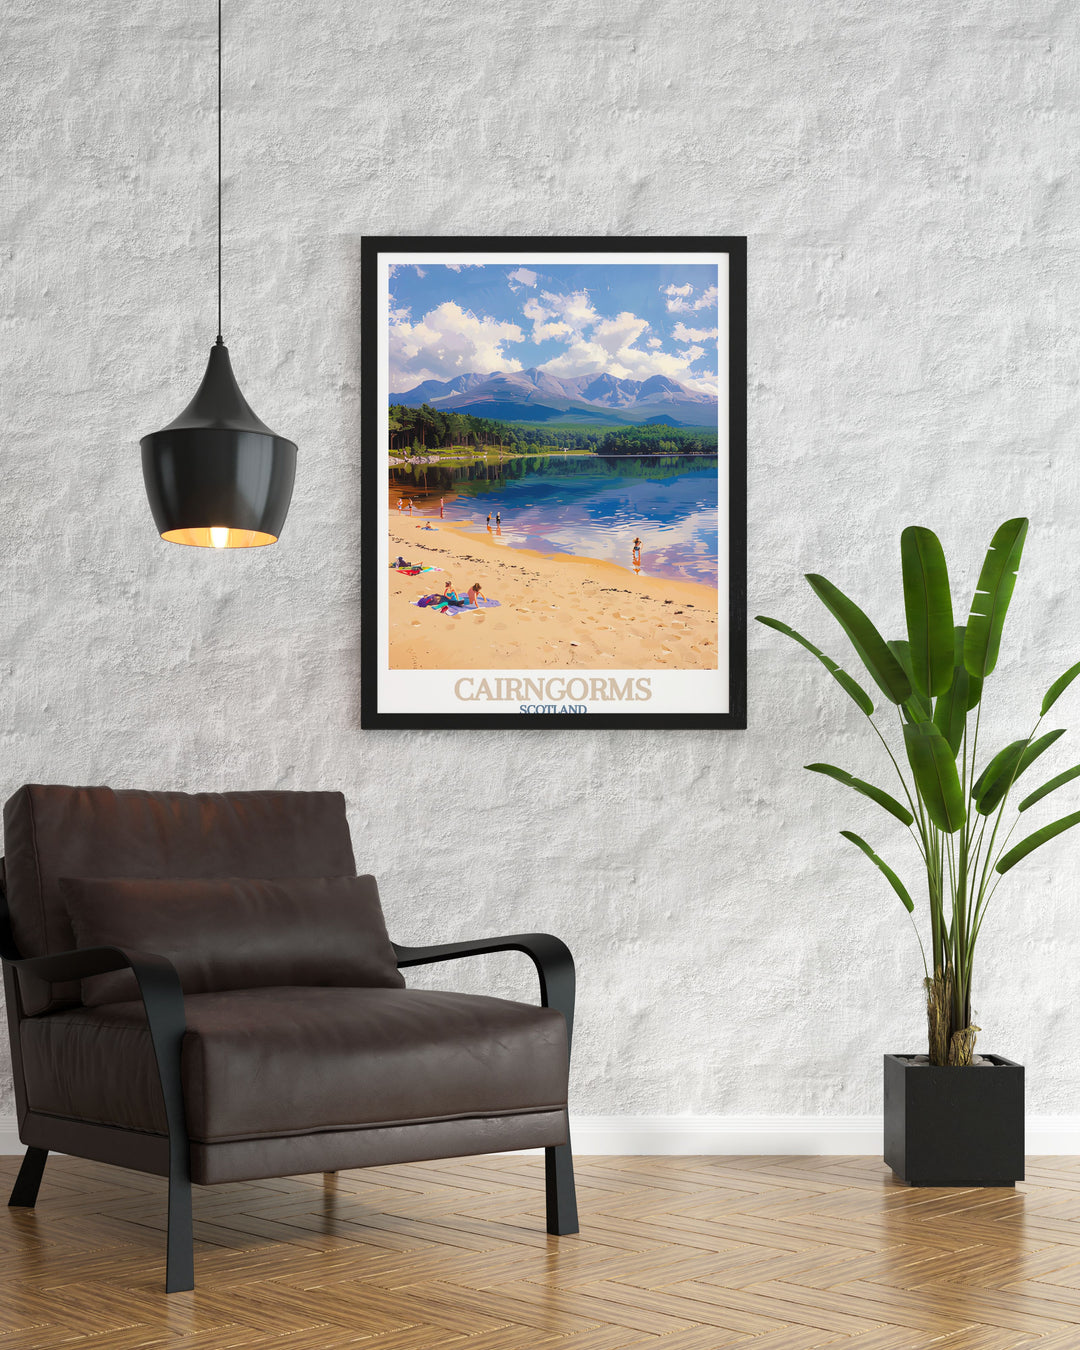 Scotland, Loch Morlich wall art piece ideal for nature lovers and travelers. Features stunning landscapes of the Cairngorms. Adds a touch of the Scottish Highlands to your living space. High quality print ensures longevity and vibrant colors.